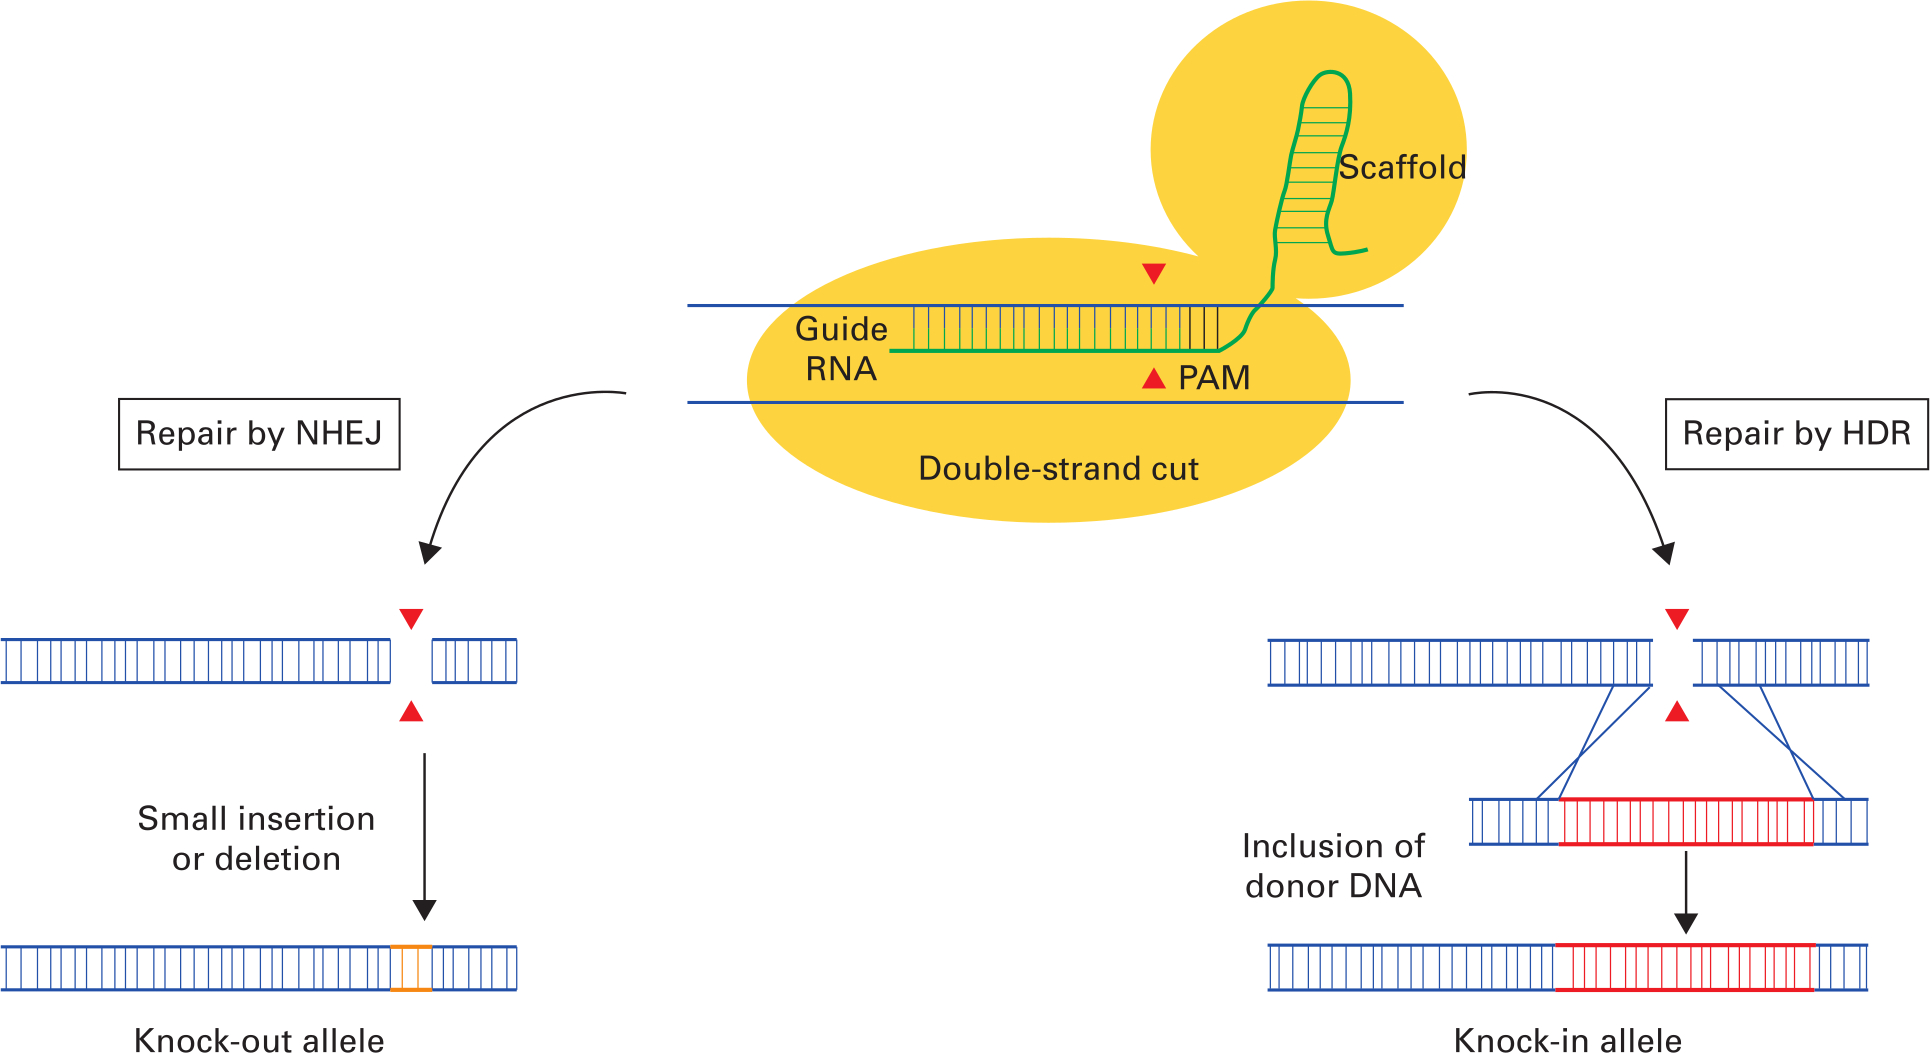 Fig. 1 
          Basic outline of Cas9 genome editing involving the two major DNA repair pathways: non-homologous end-joining (NHEJ) and homology-directed repair (HDR). The initial step is for the clustered regularly interspaced short palindromic repeats (CRISPR)-Cas9 complex to bind to its DNA target. The CRISPR-Cas9 complex comprises Cas9 endonuclease (yellow) and single guide RNA (gRNA) and RNA scaffold (green) that binds to a specific DNA dictated by the gRNA. DNA cleavage will only occur when the gRNA is adjacent to the protospacer adjacent motif (PAM) recognition sequence. Following double-strand cleavage by the Cas9 endonuclease, DNA repair can be mediated by one of two possible mechanisms: NHEJ or HDR. Repair by NHEJ (left pathway) leads to the inclusion of DNA insertions or deletions (orange) resulting in a reading-frame shift, leading to a premature stop codon in the downstream sequence and the ‘knocking-out’ out of the targeted allele. Repair by HDR (right pathway) in the presence of donor DNA (red) targeted to the cut site results in insertion of the donor DNA sequence at the site of the DNA strand break and a ‘knock-in’ allele. Image adapted from Cribbs AP, Perera SMW. Science and Bioethics of CRISPR-Cas9 Gene Editing: An Analysis Towards Separating Facts and Fiction. Yale J Biol Med. 2017;90(4):625–634.
        